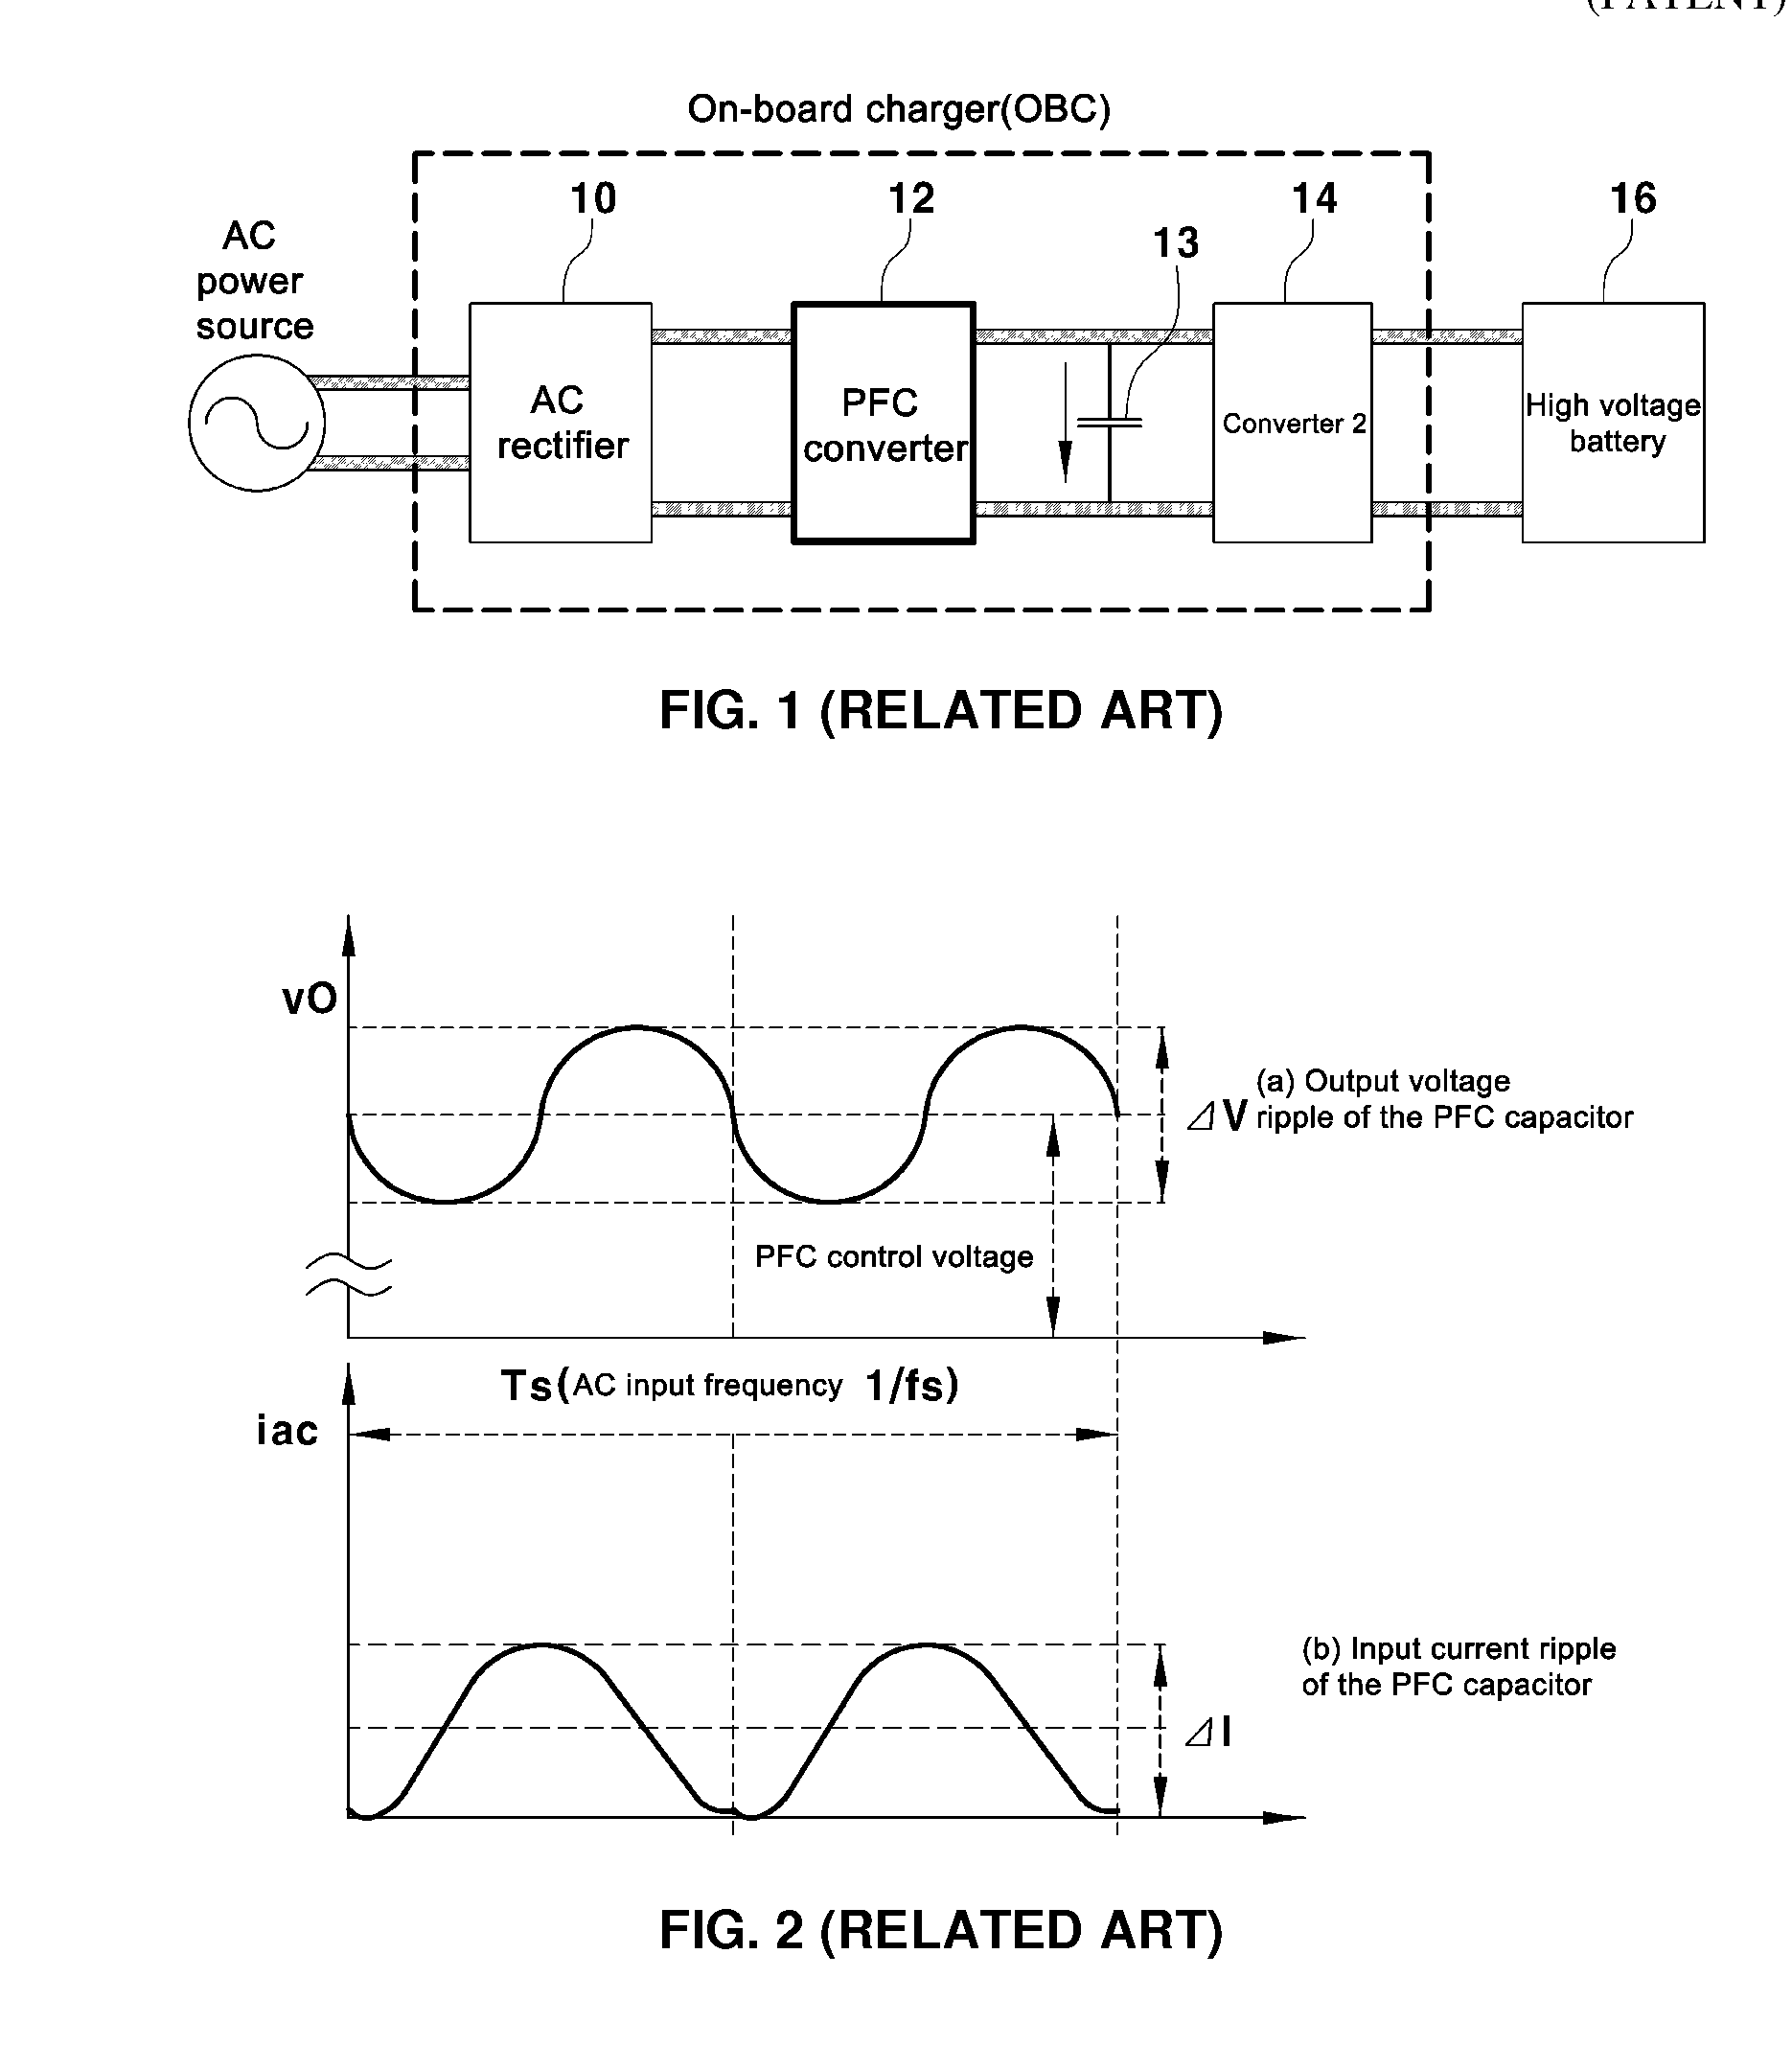 Method for controlling on-board charger of eco-friendly vehicle